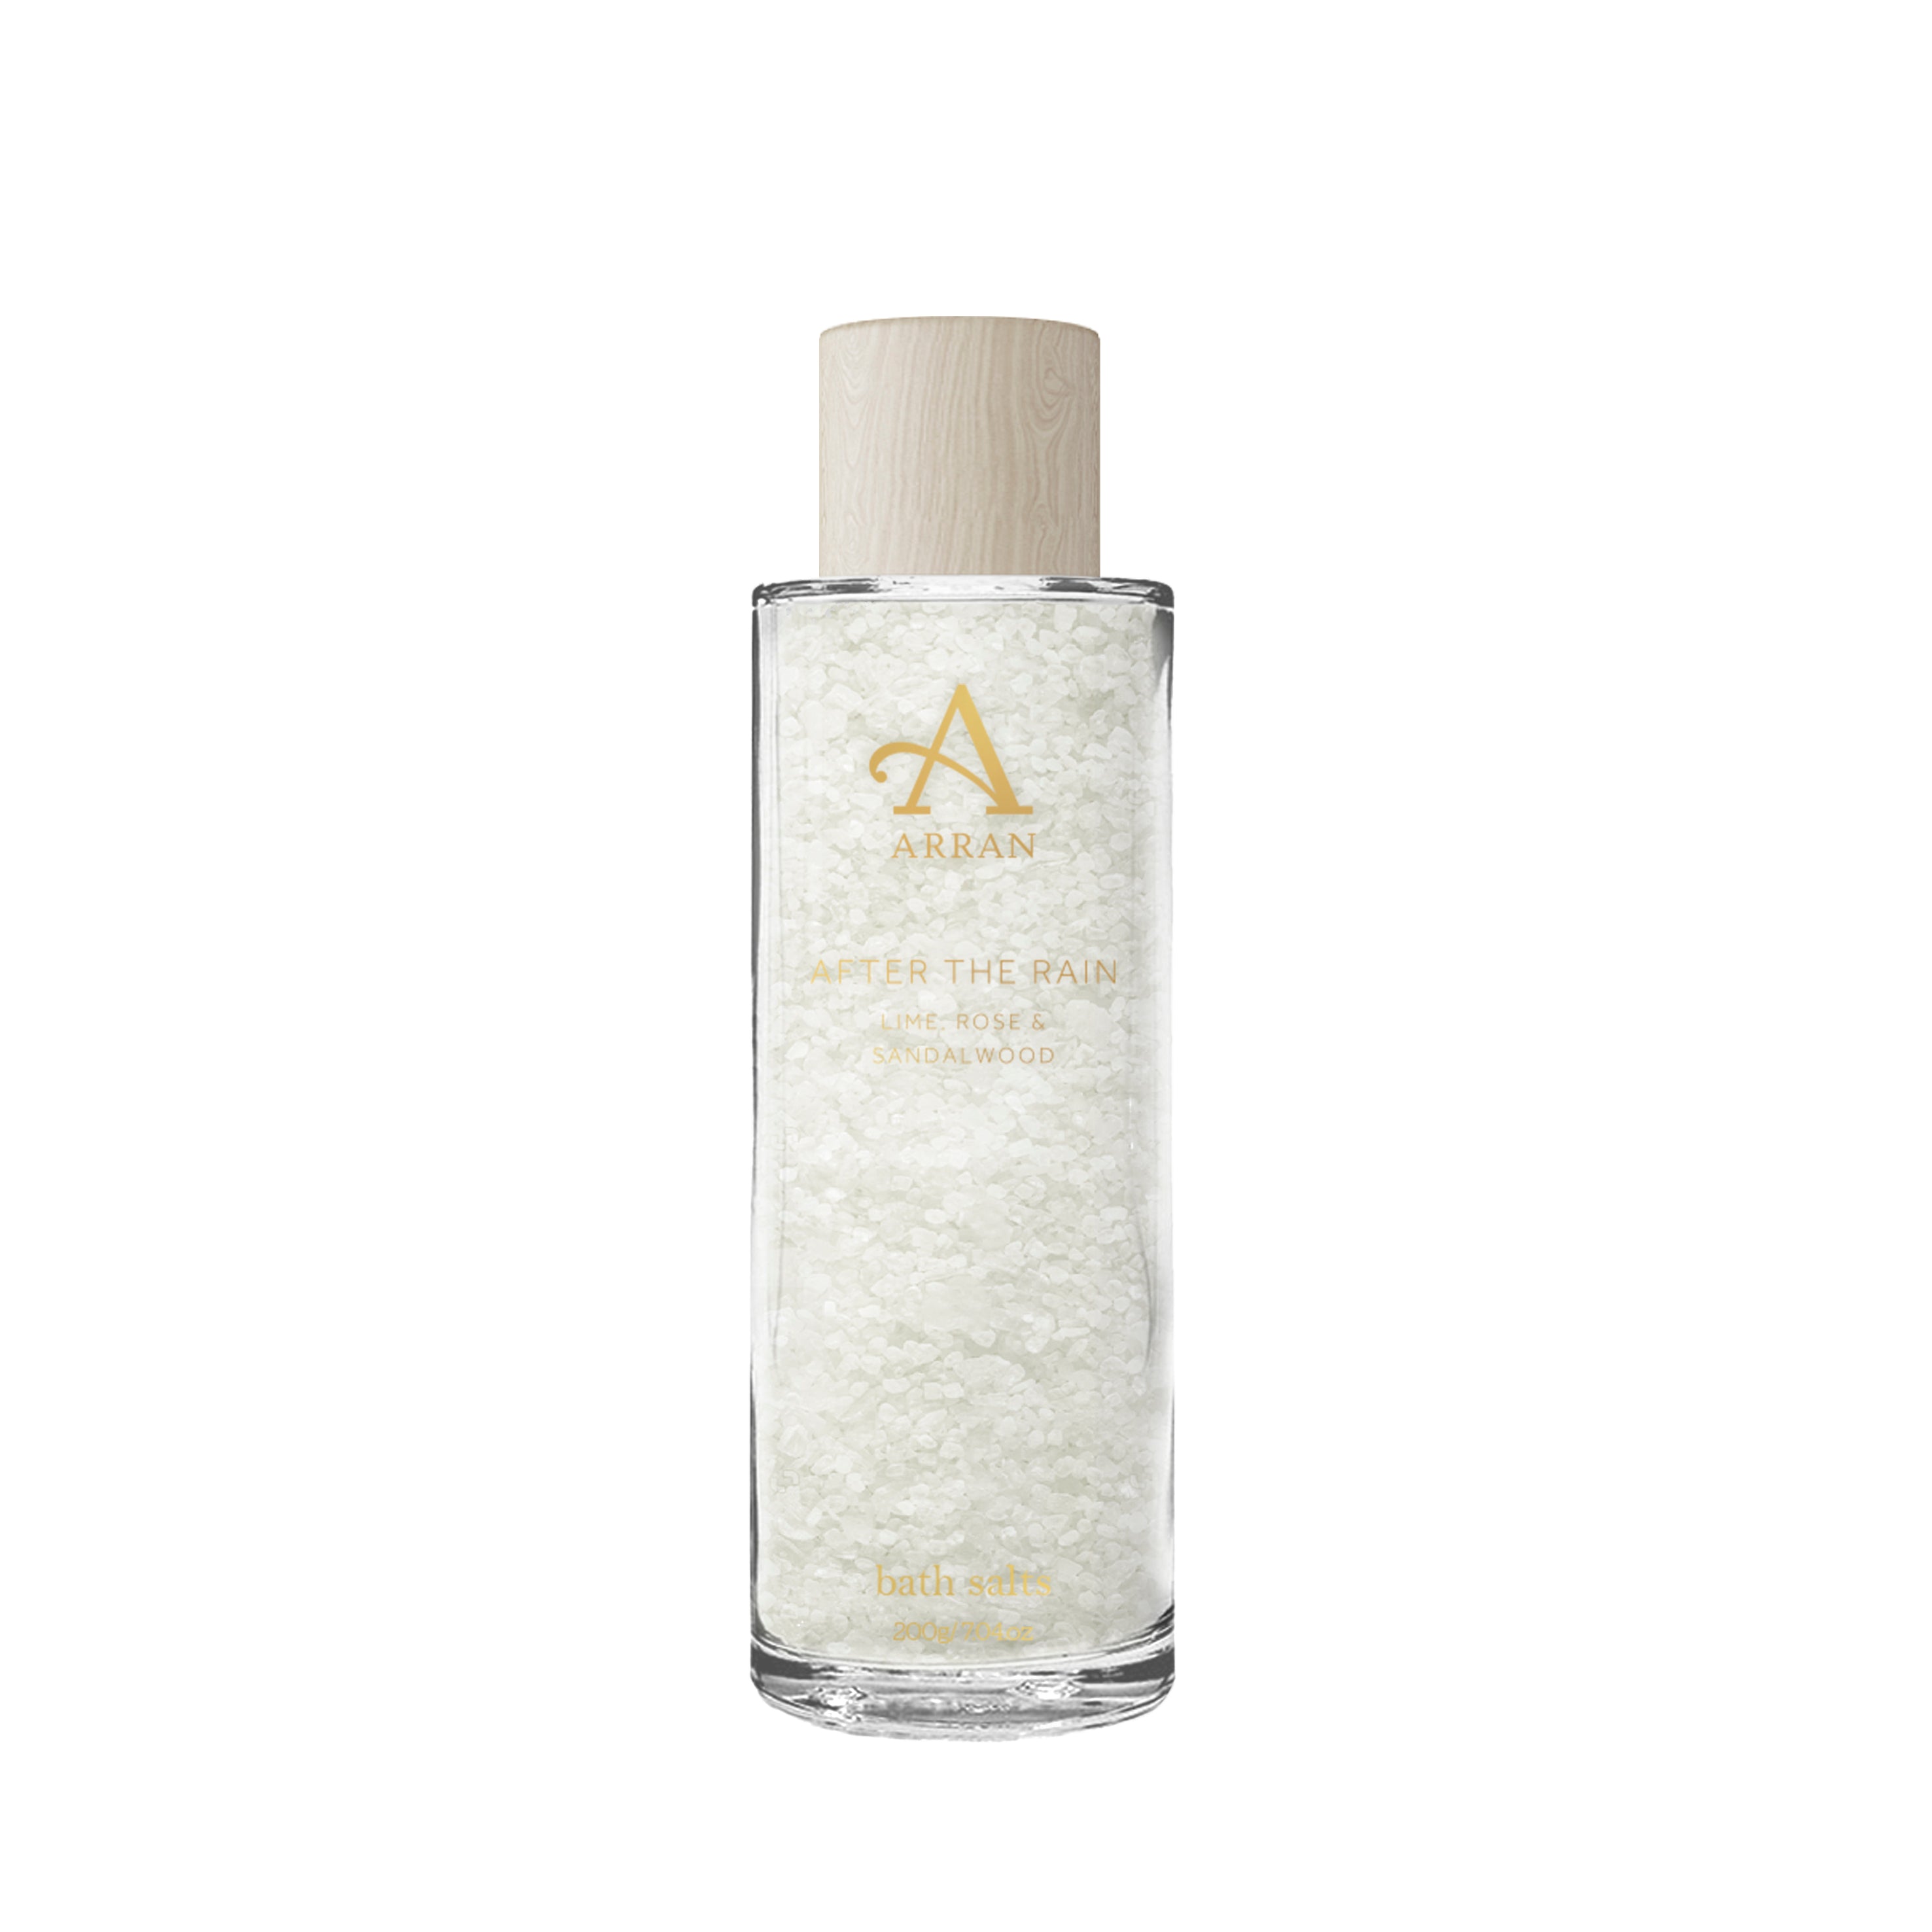 An image of ARRAN After The Rain Bath Salts | Made in Scotland | Lime, Rose & Sandalwood Sce...